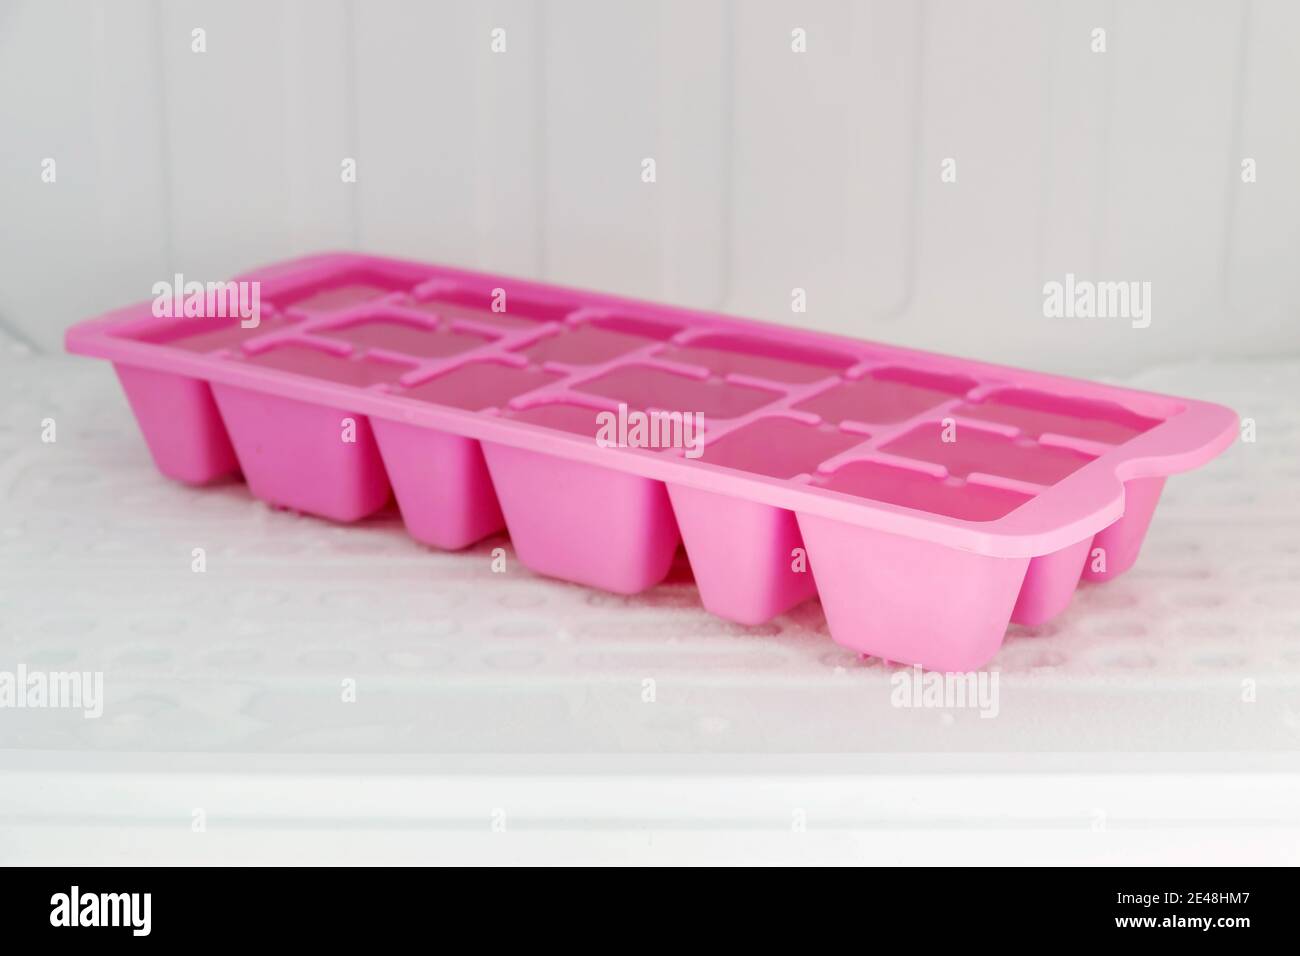 https://c8.alamy.com/comp/2E48HM7/colorful-plastic-ice-tray-in-the-freezer-compartment-of-the-refrigerator-2E48HM7.jpg